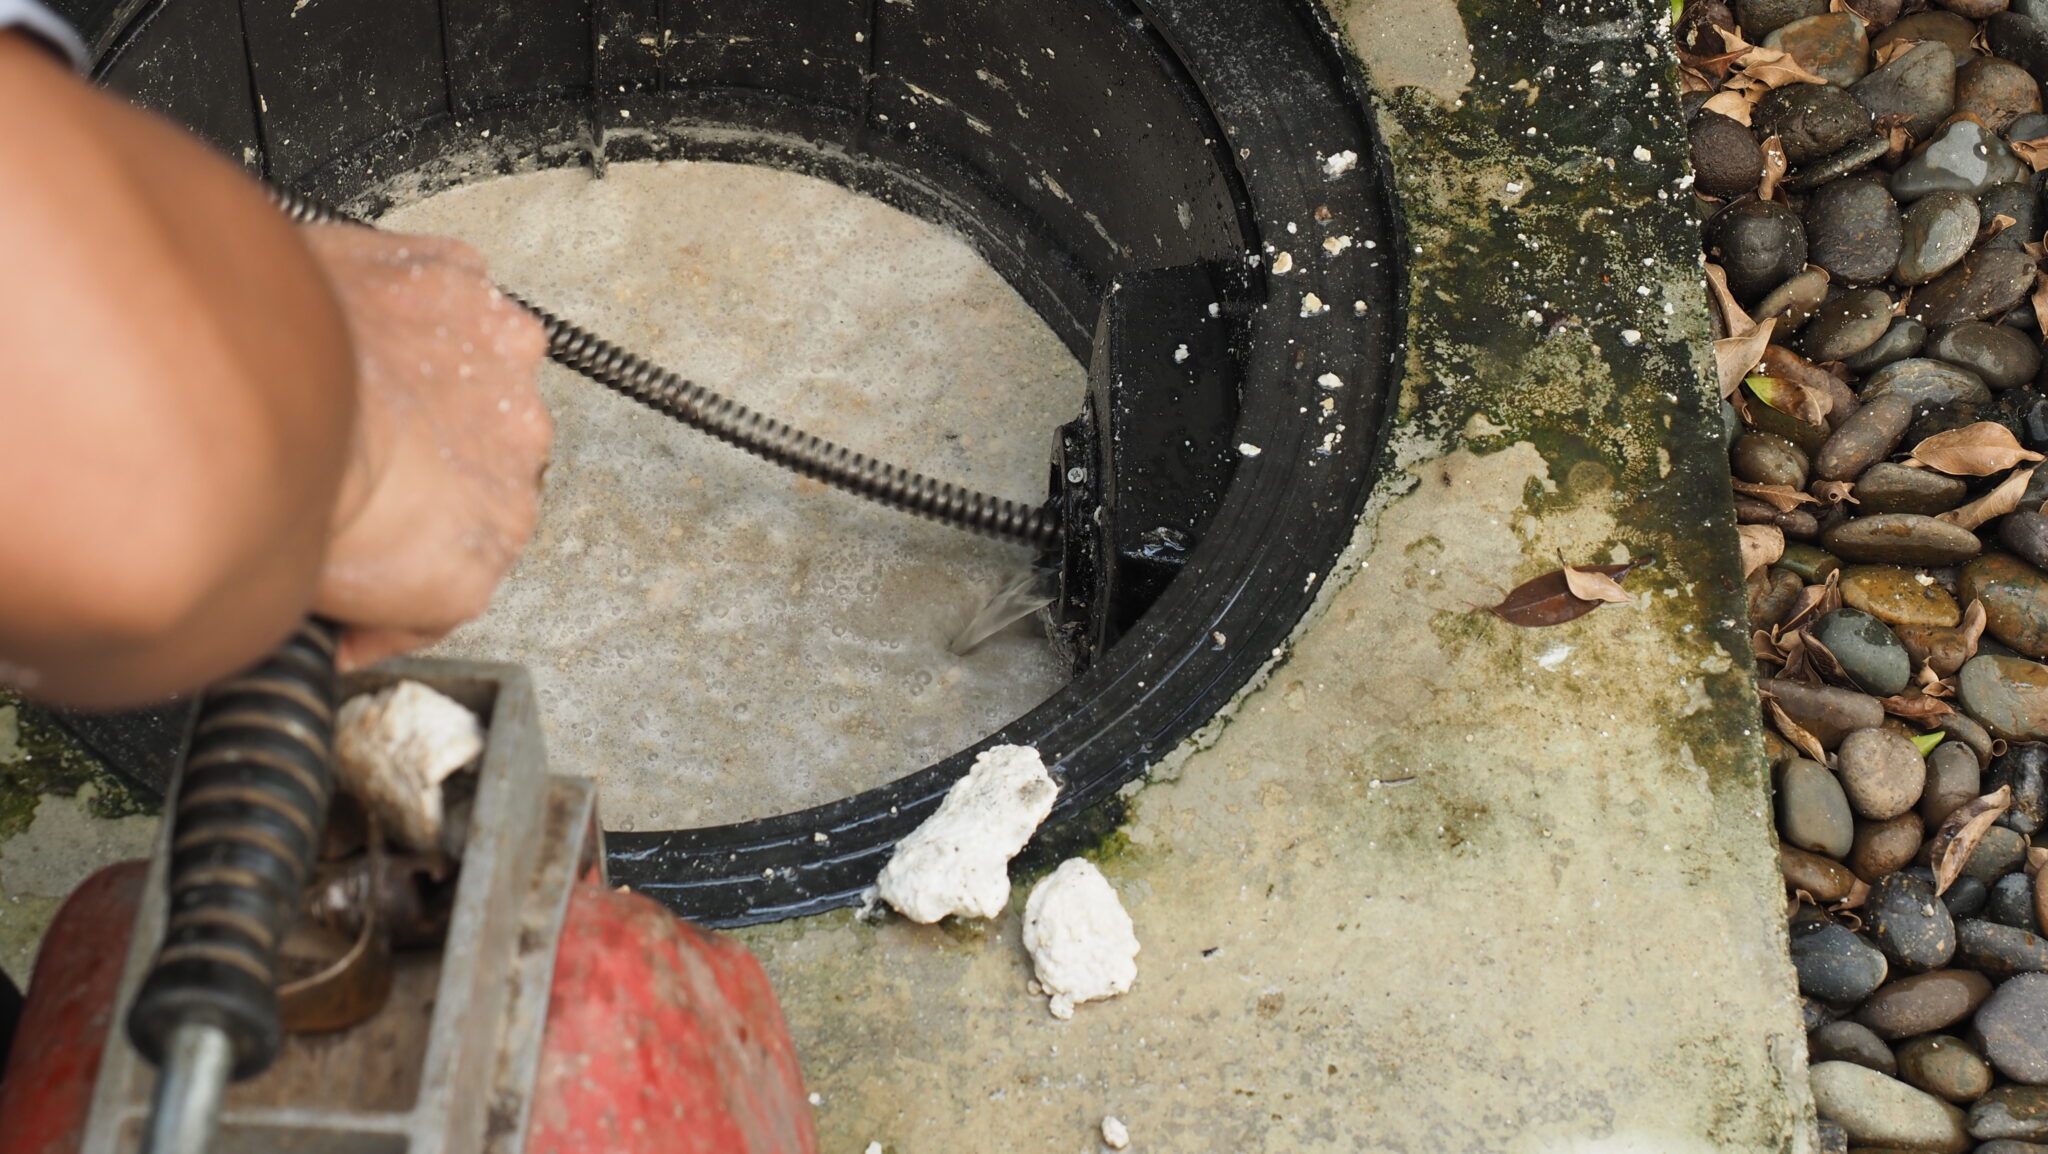 How To Care For Grease Traps | The Ultimate Guide